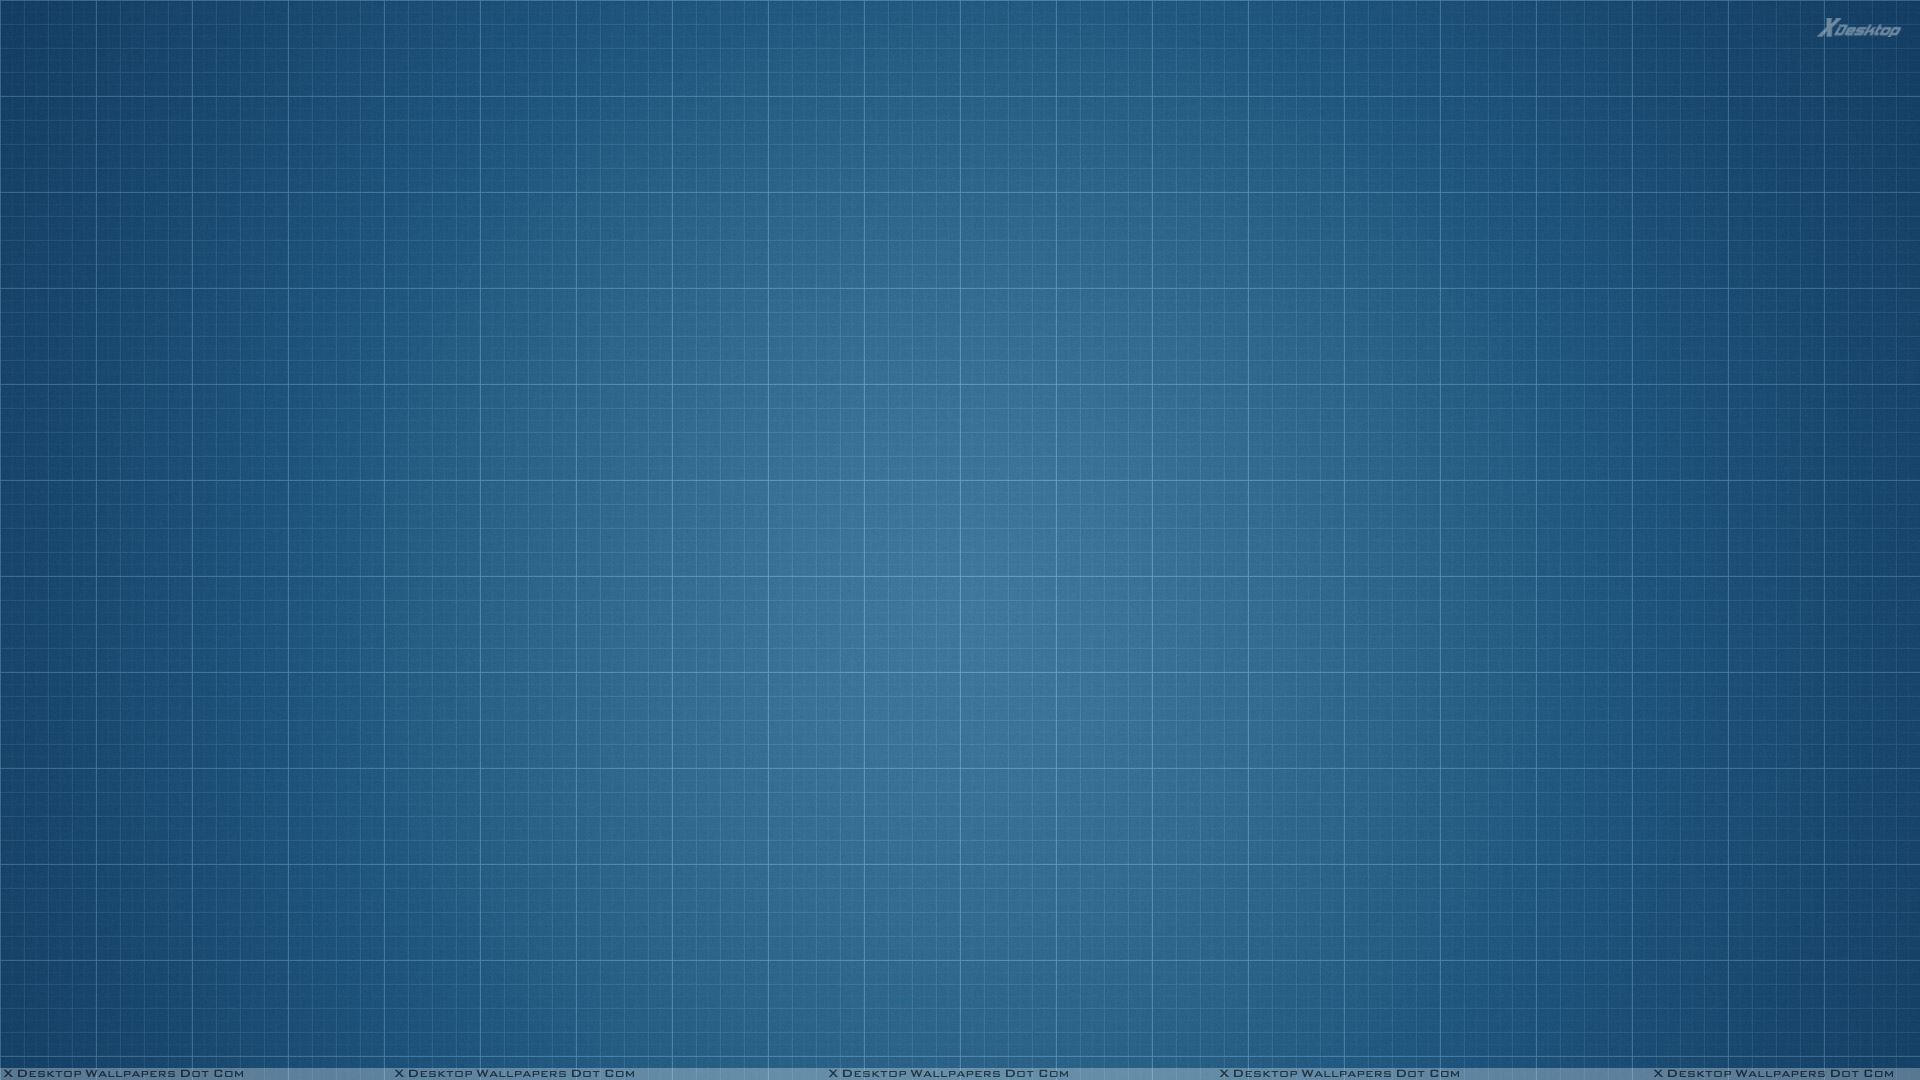 Small Squares On Blue Background Wallpaper